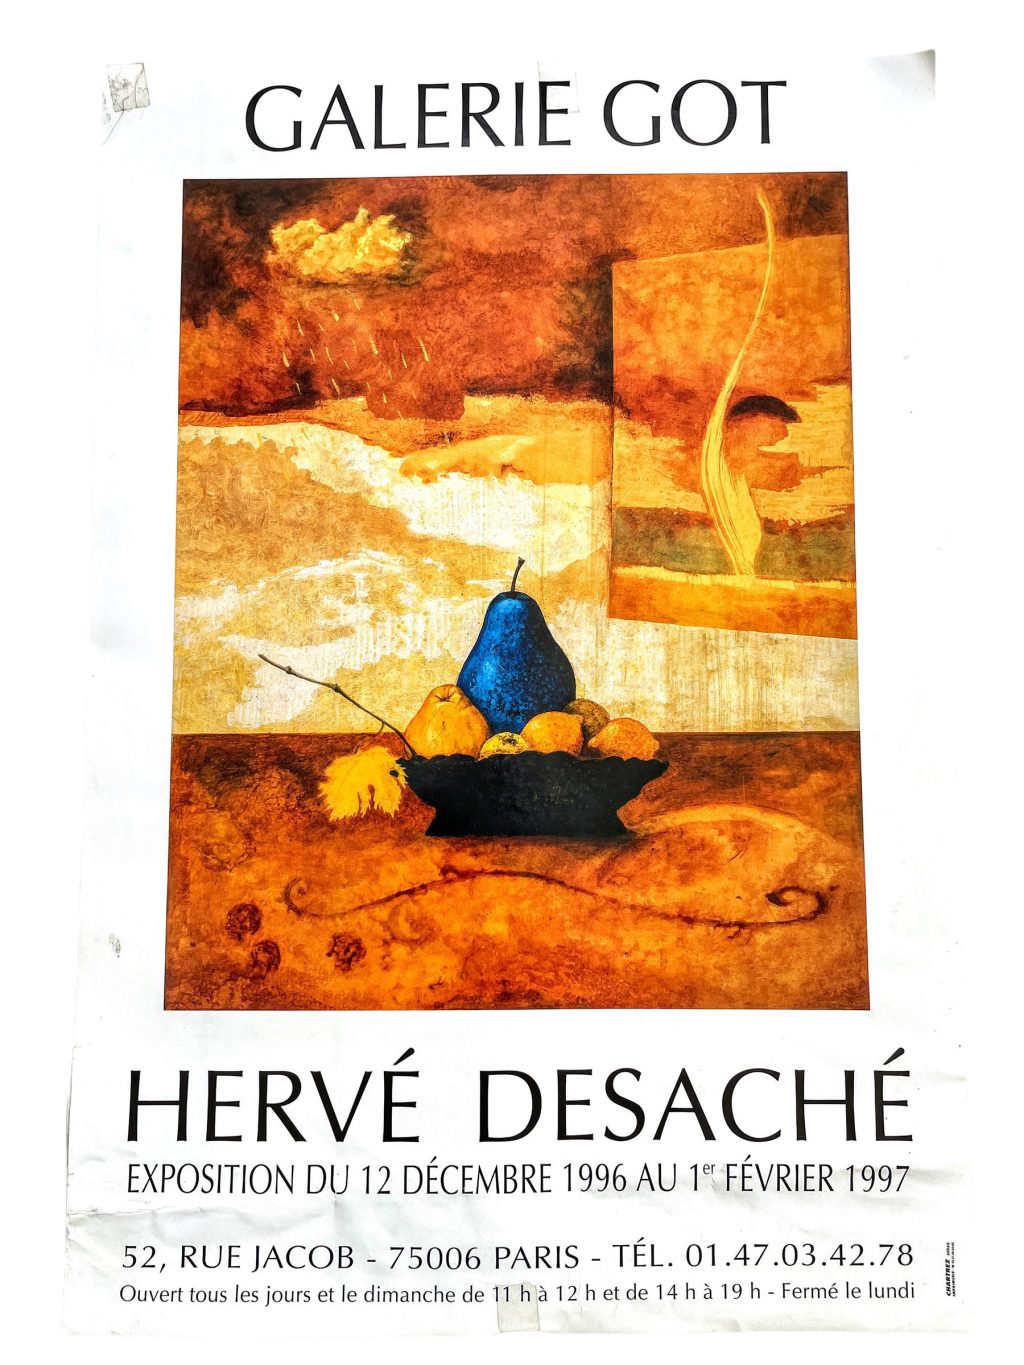 Vintage French Herve Desache Galerie Got Paris Gallery Original Exhibition Poster Wall Decor Painting Display Display c1996 / EVE